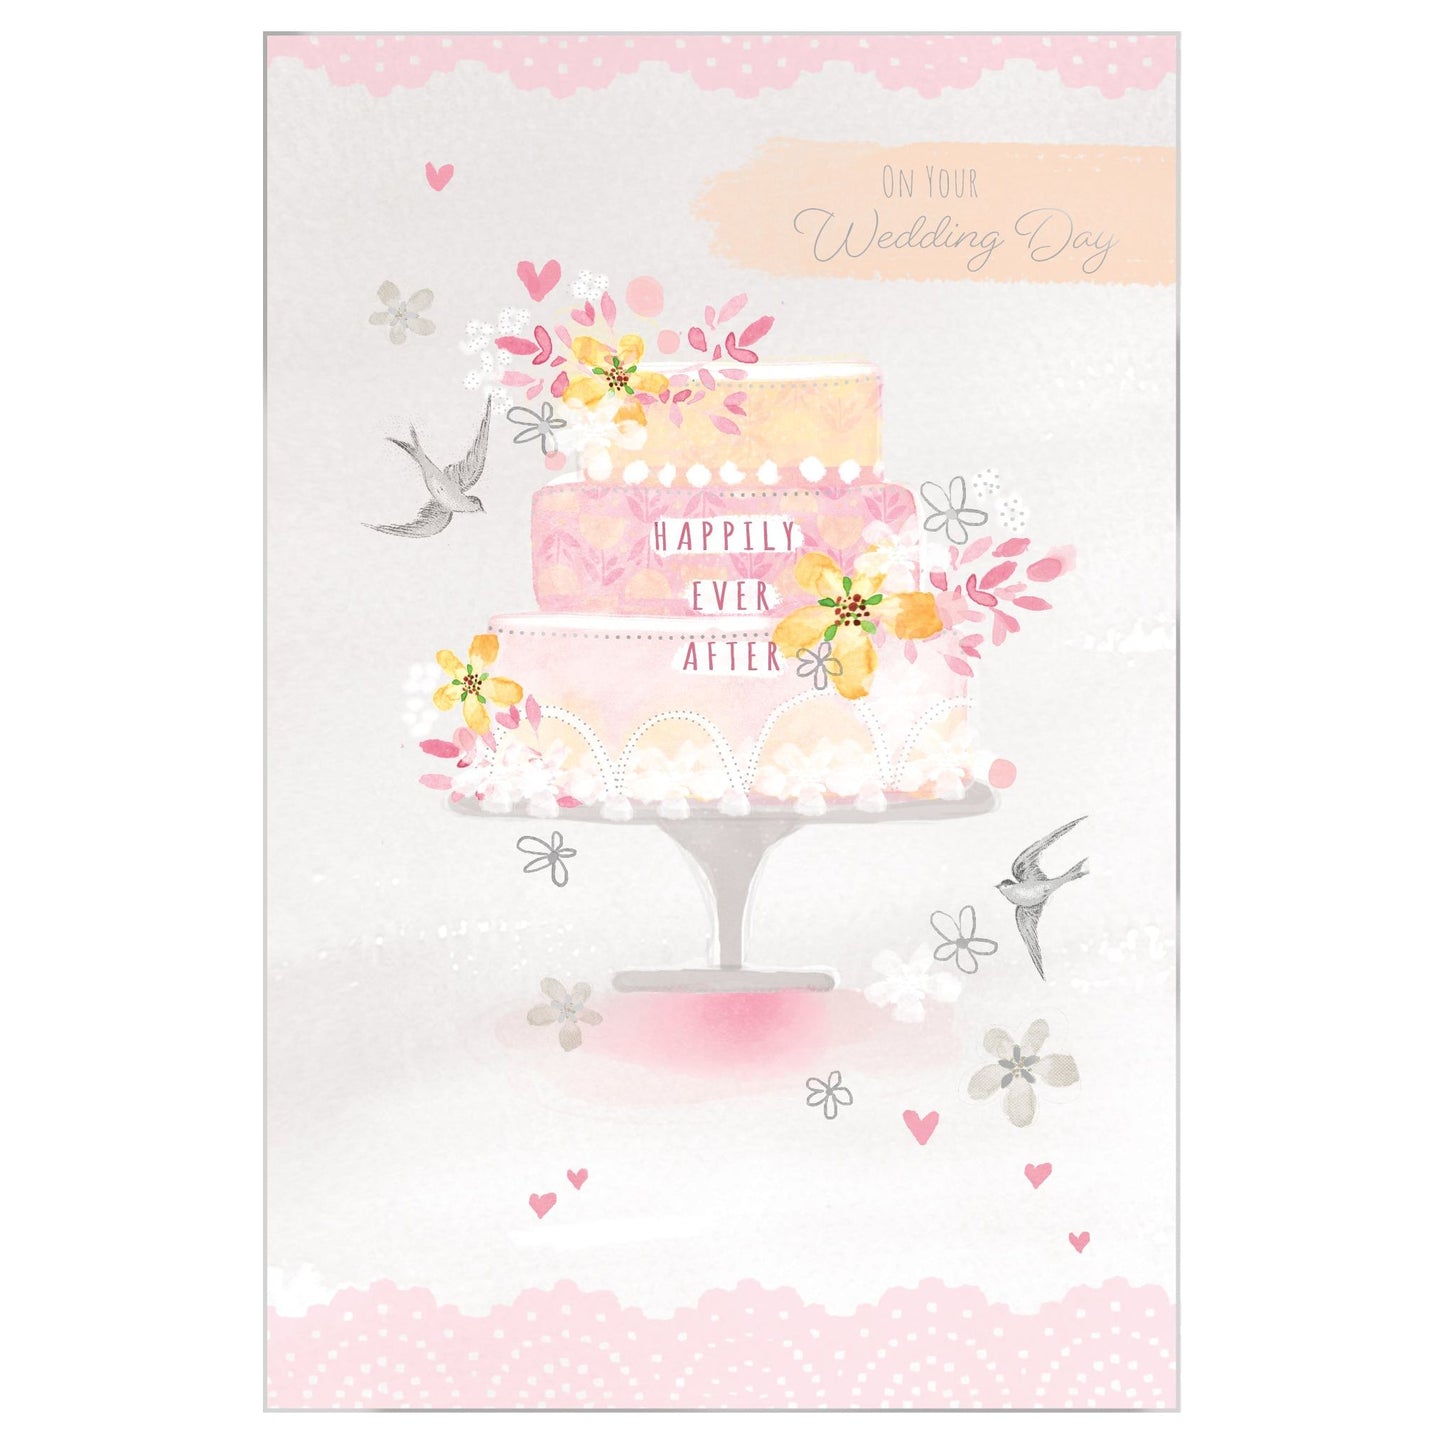 Cake Happily Ever After Wedding Card